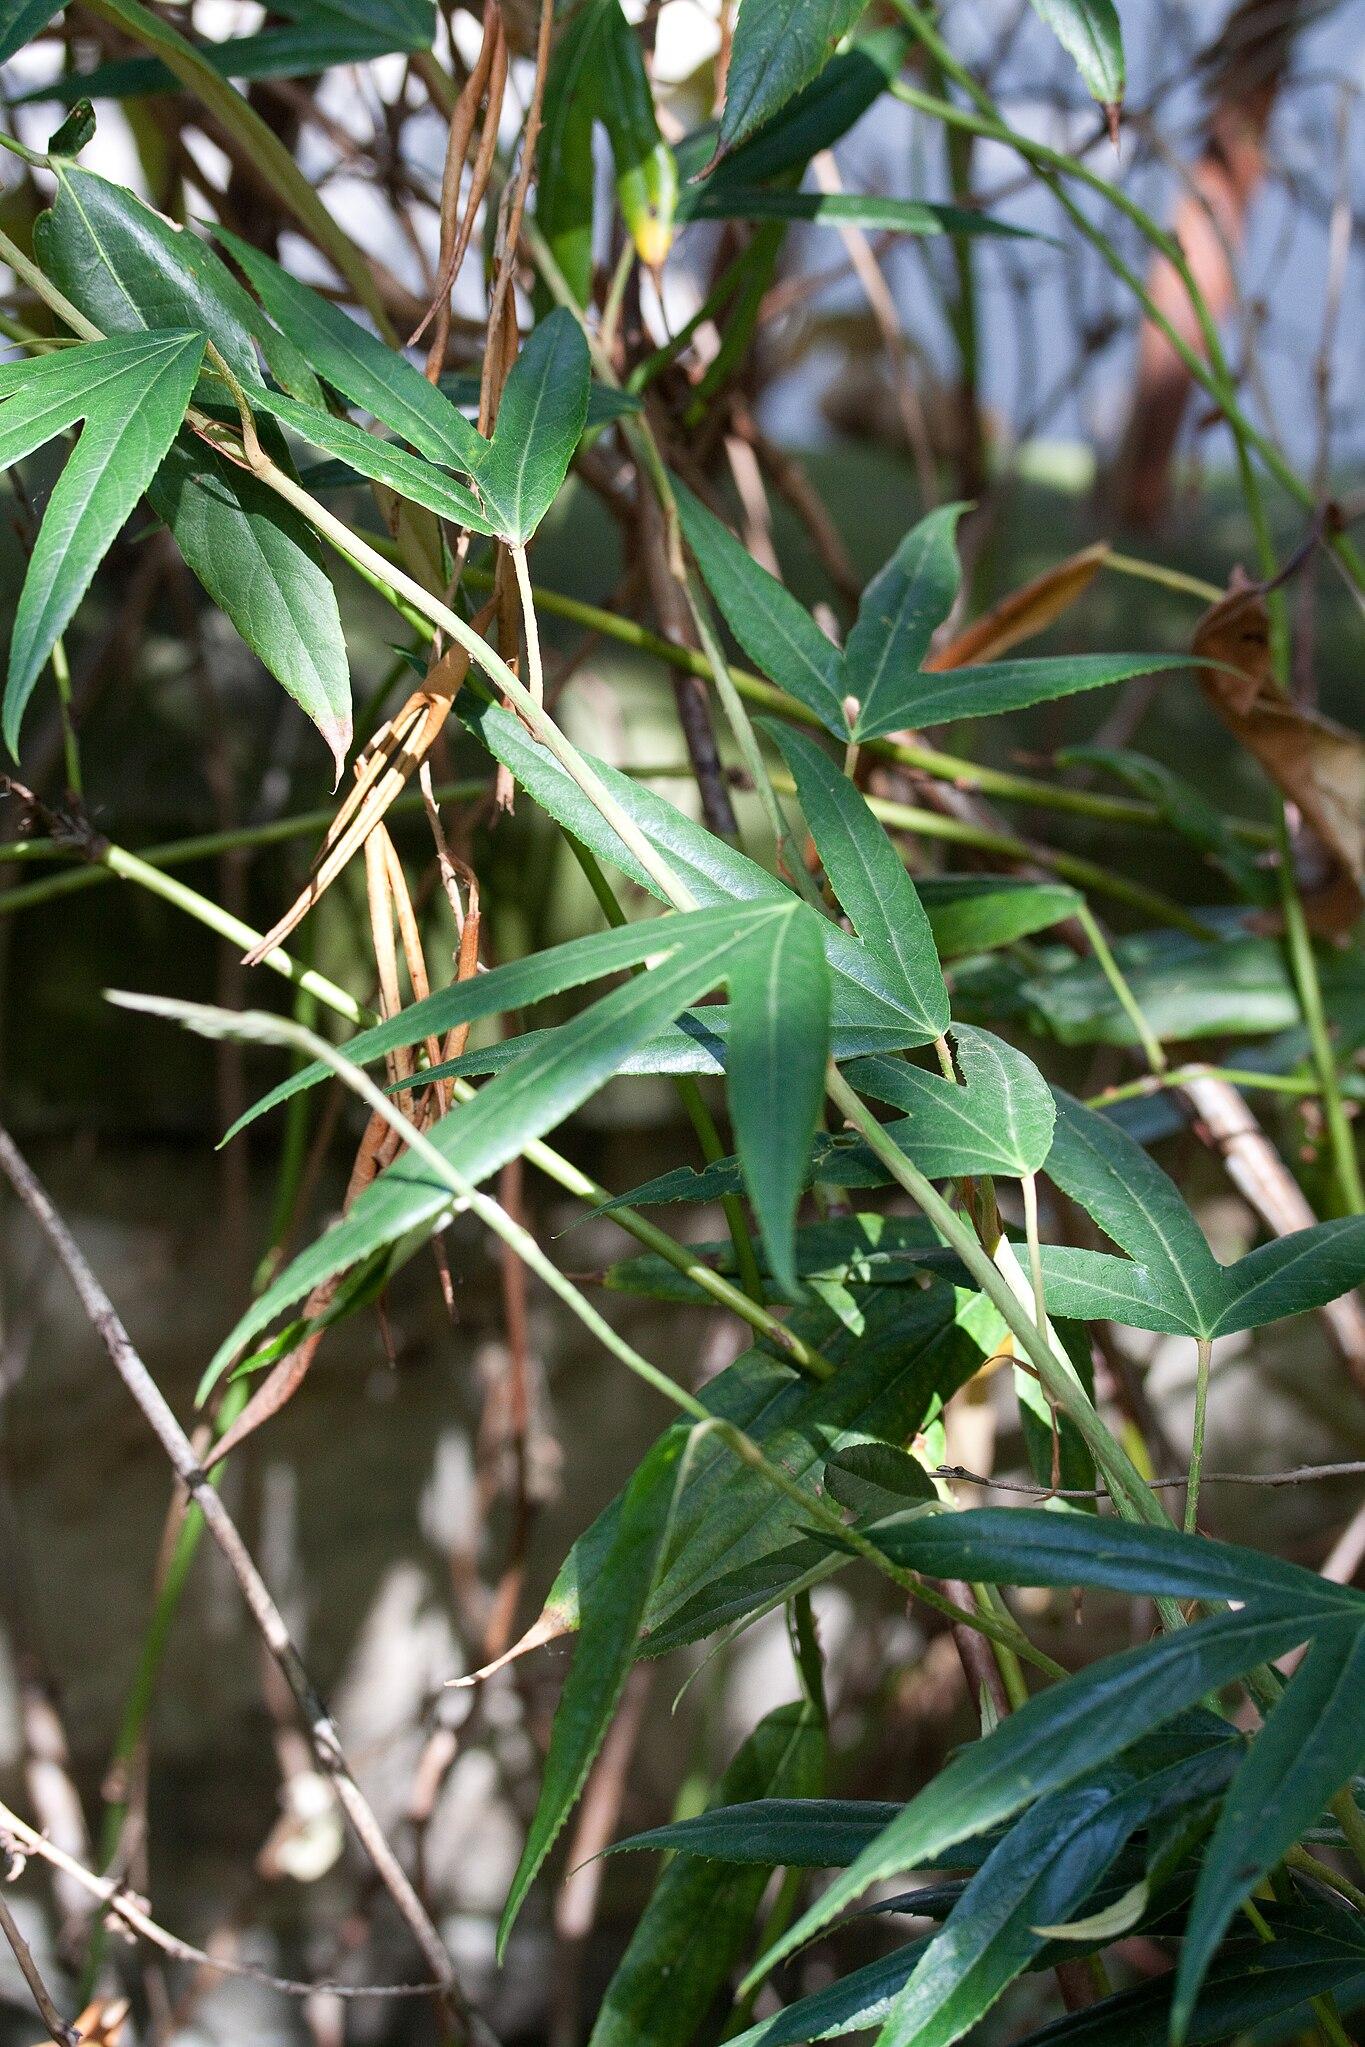 Green leaves with lime-green stipules, brown stem.